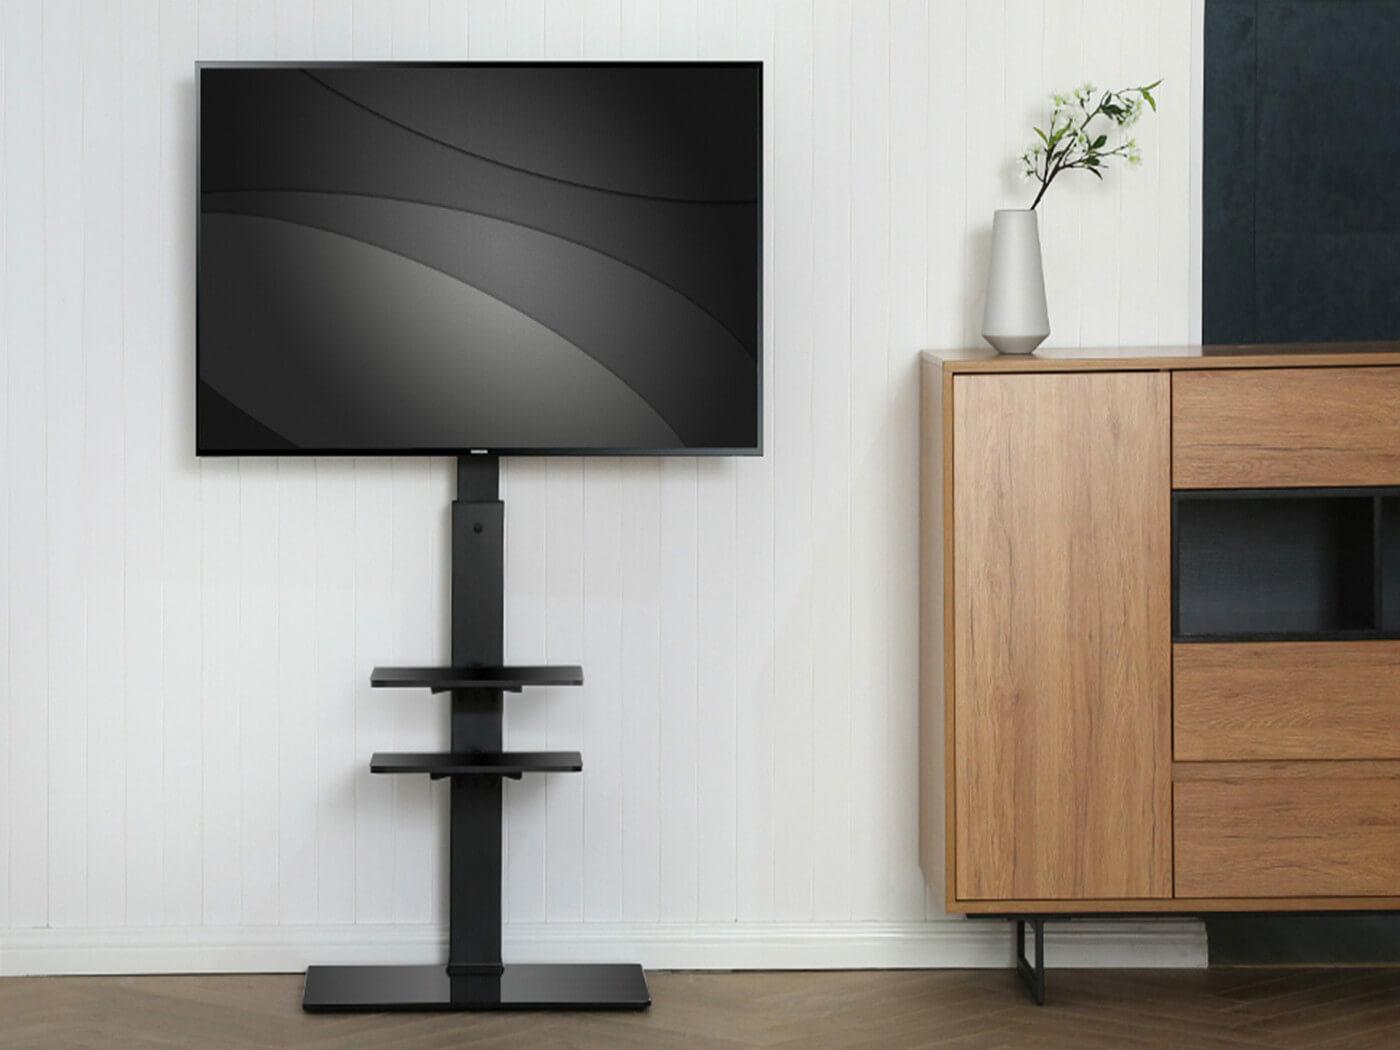 Be a Wise Floor TV Stand Buyer